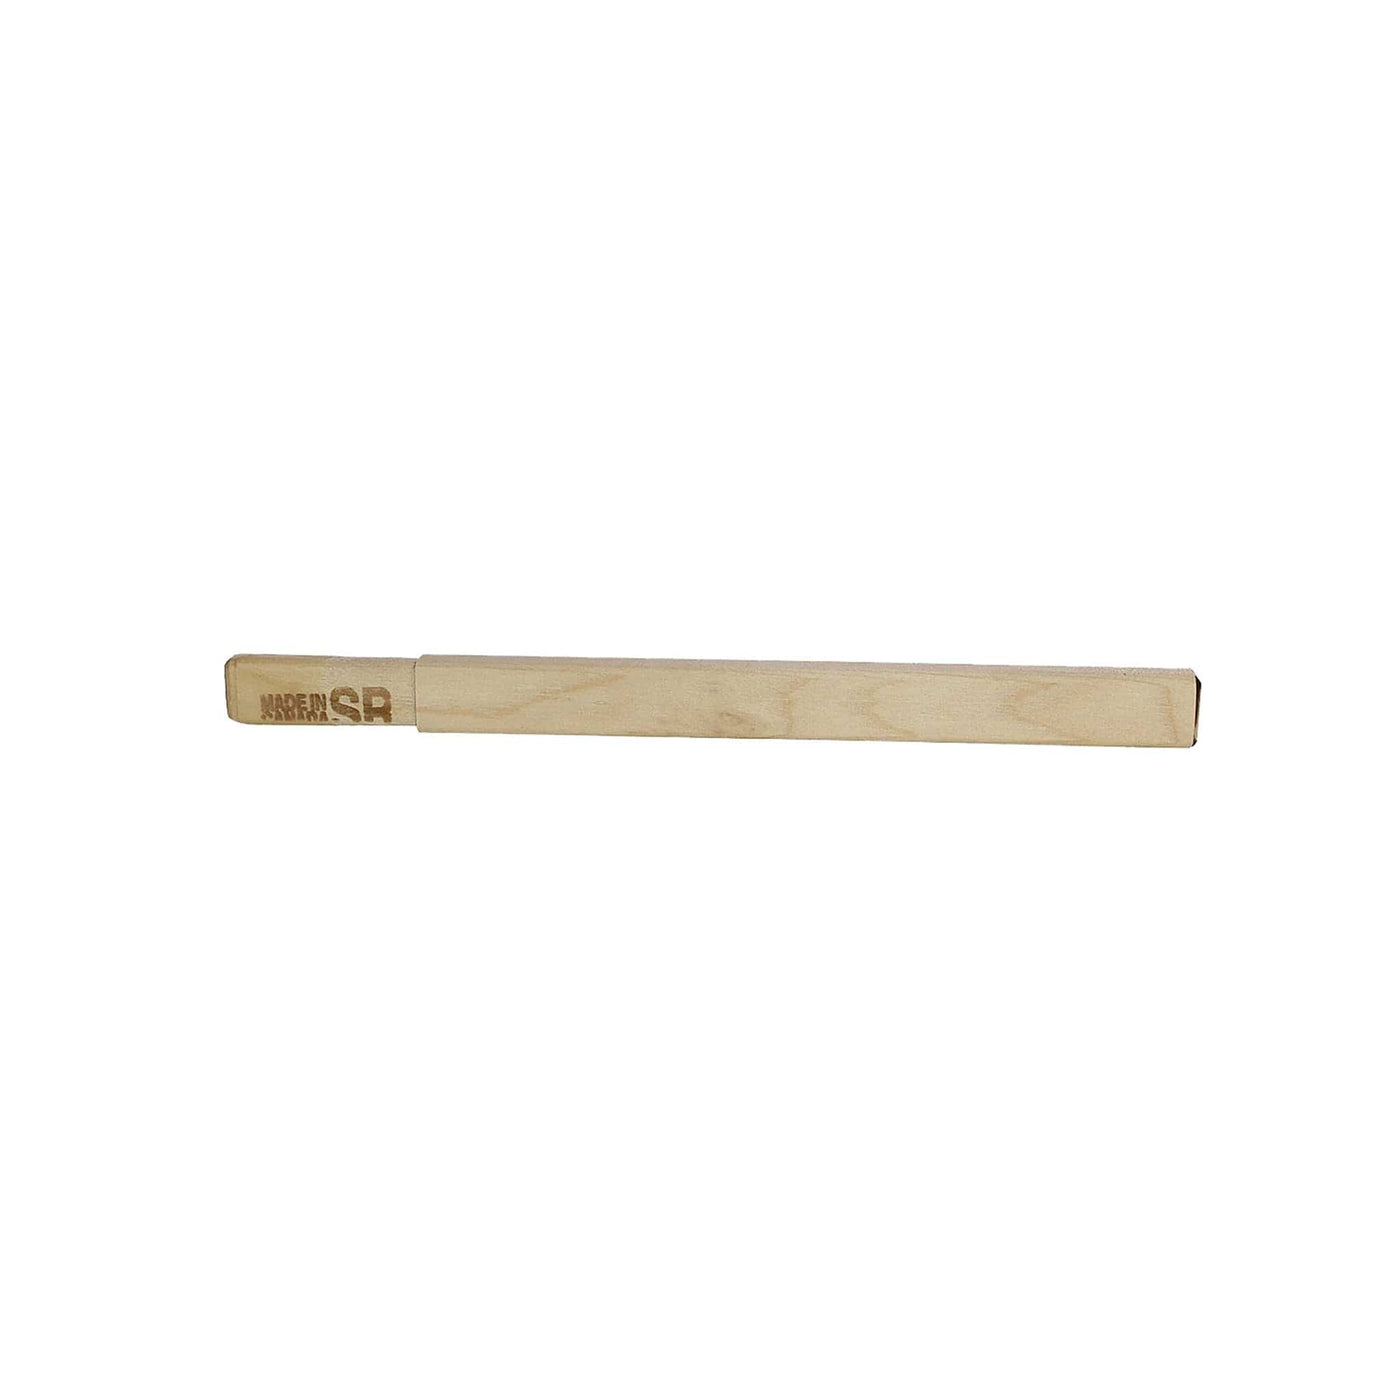 Blue Sports Senior Wood Butt End - 8" - The Hockey Shop Source For Sports